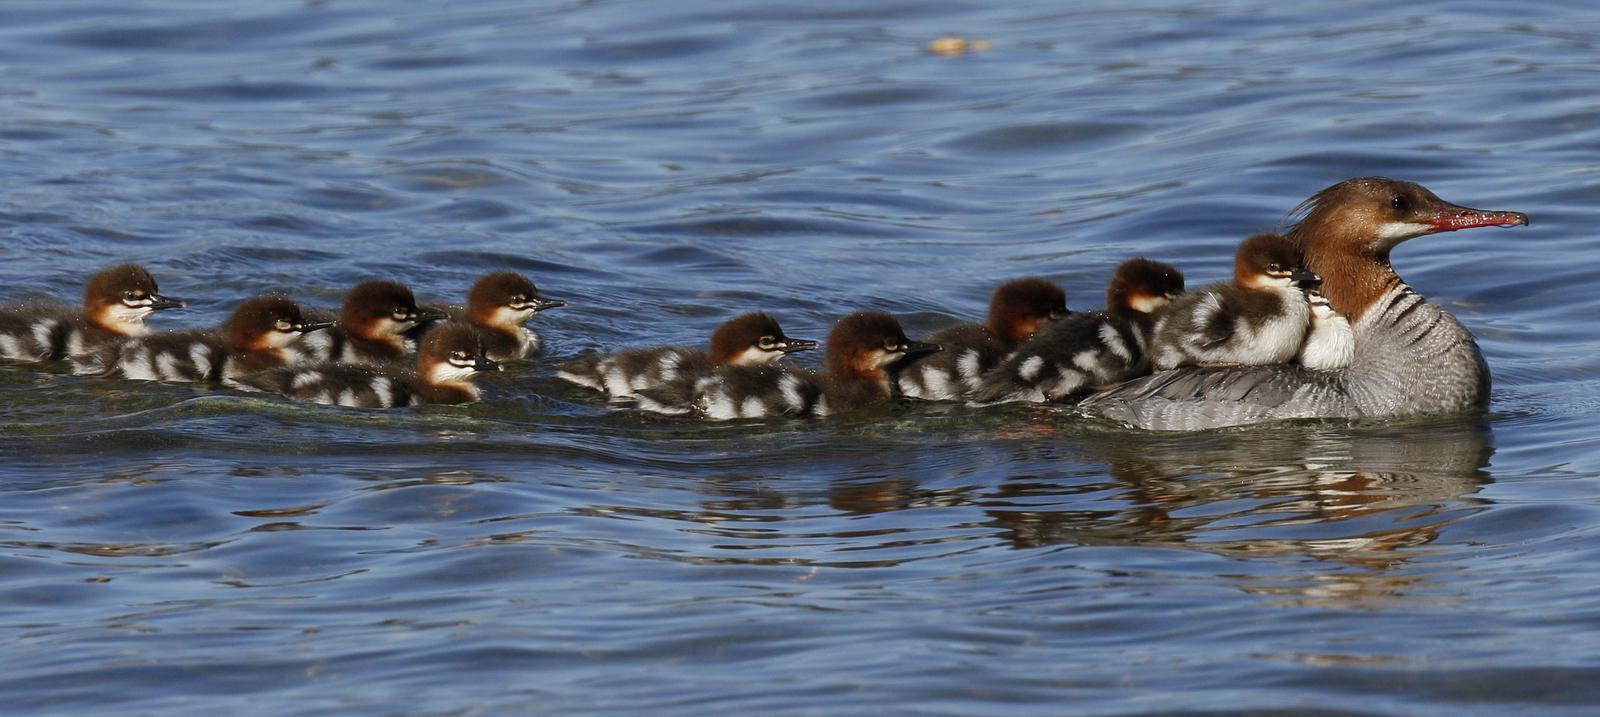 Common Merganser Photo by Emily Willoughby